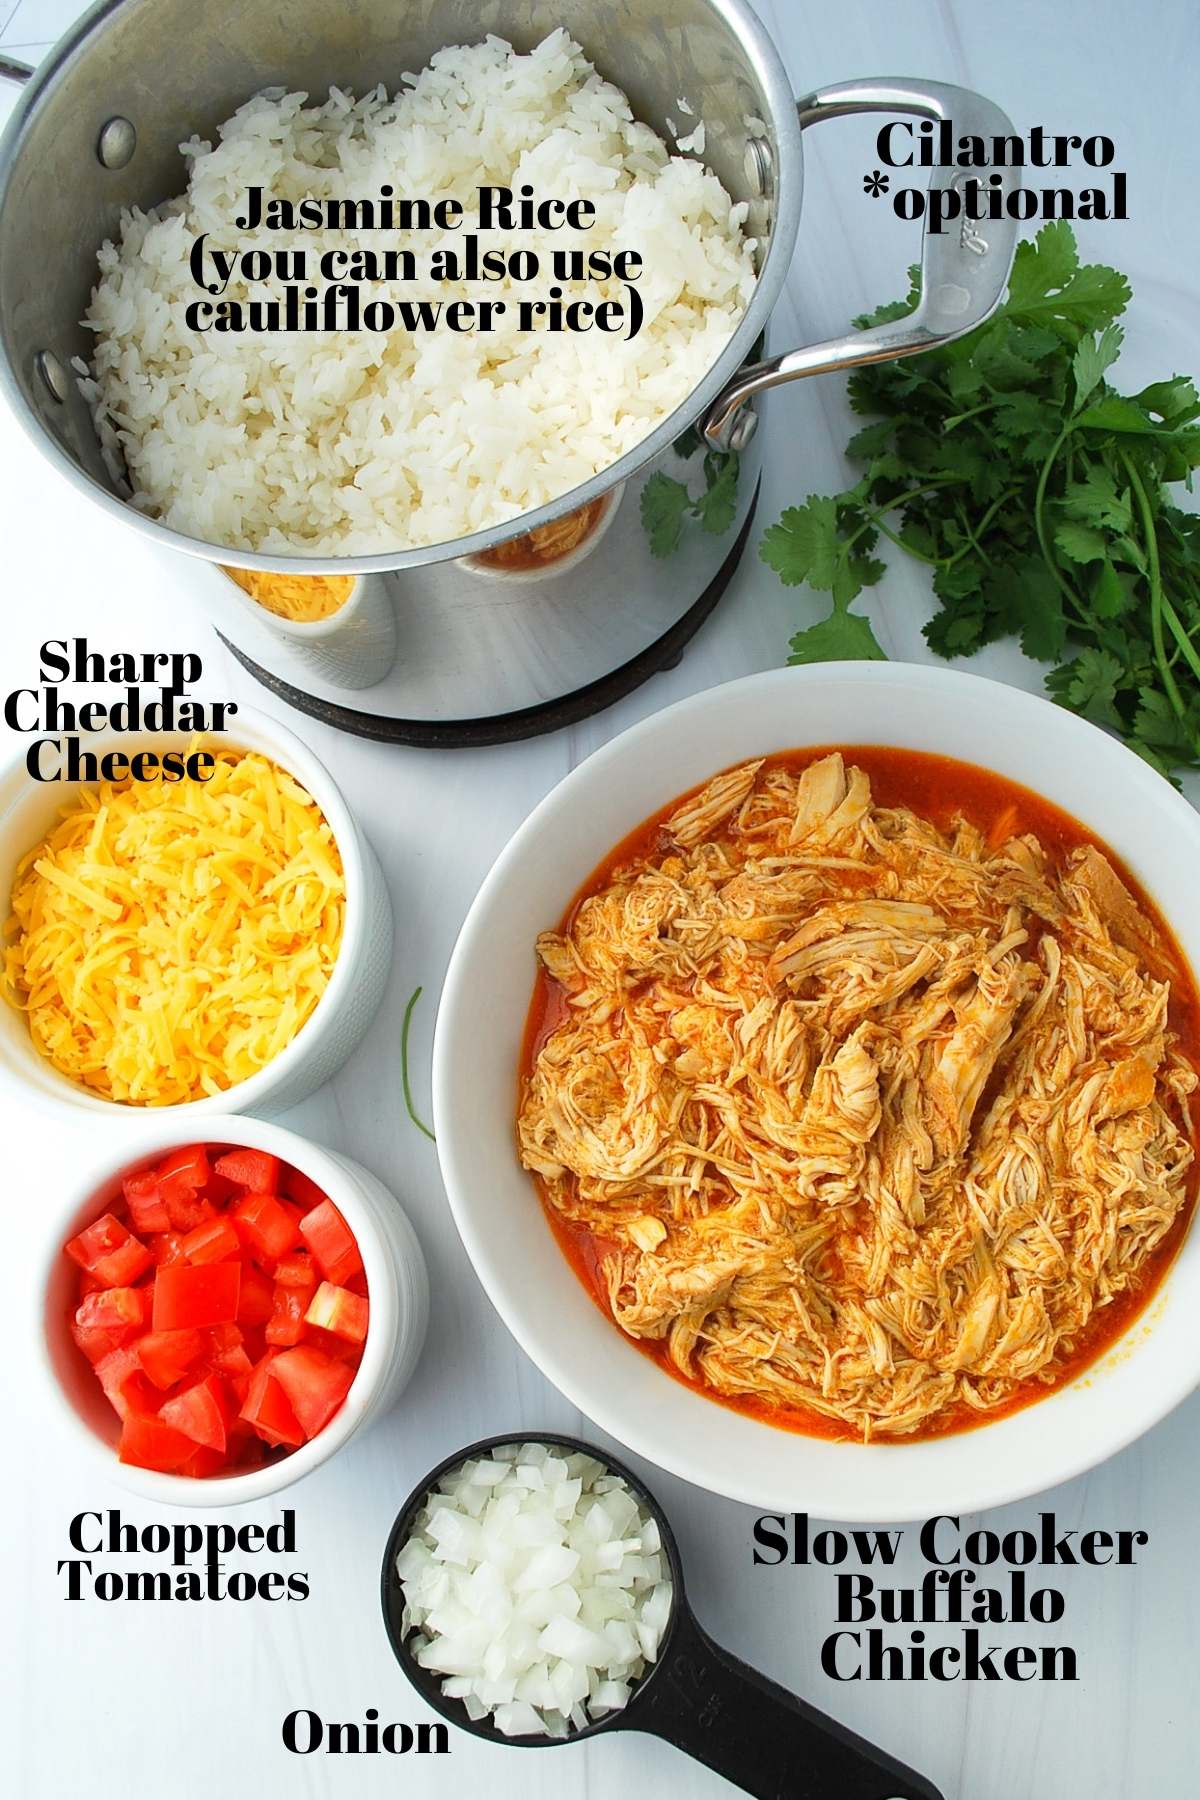 ingredients for buffalo chicken meal prep labeled: rice, cilantro, shredded buffalo chicken, cheese, tomatoes, and onions